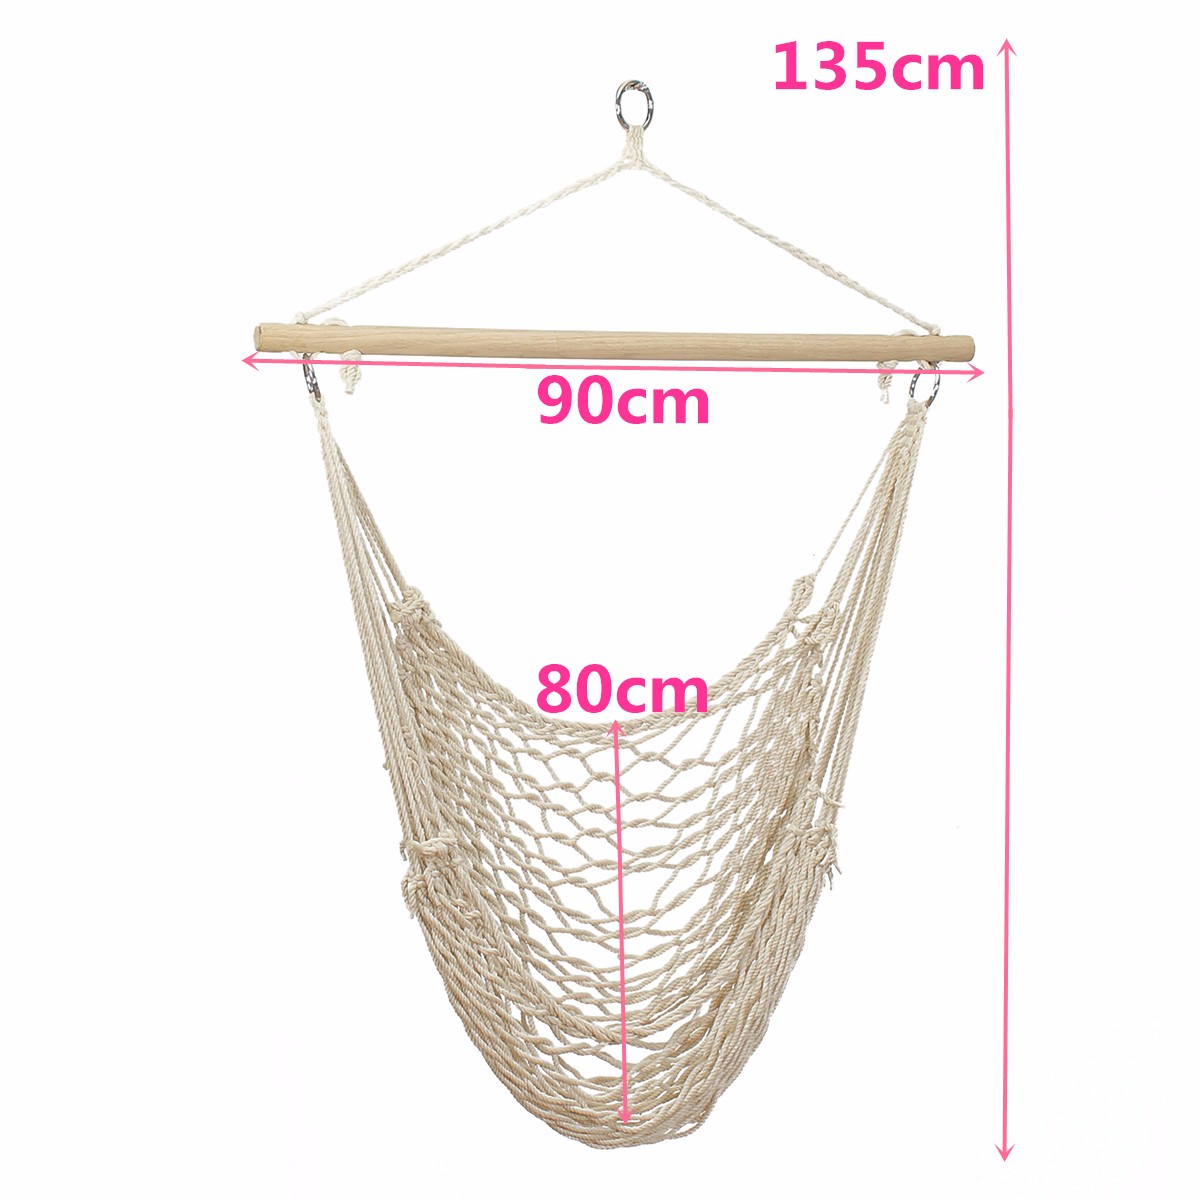 135-x-90CM-Portable-Outdoor-Swing-Cotton-Hammock-Chair-Wooden-Bar-Hanging-Rope-Chair-For-Garden-Pati-1304667-9